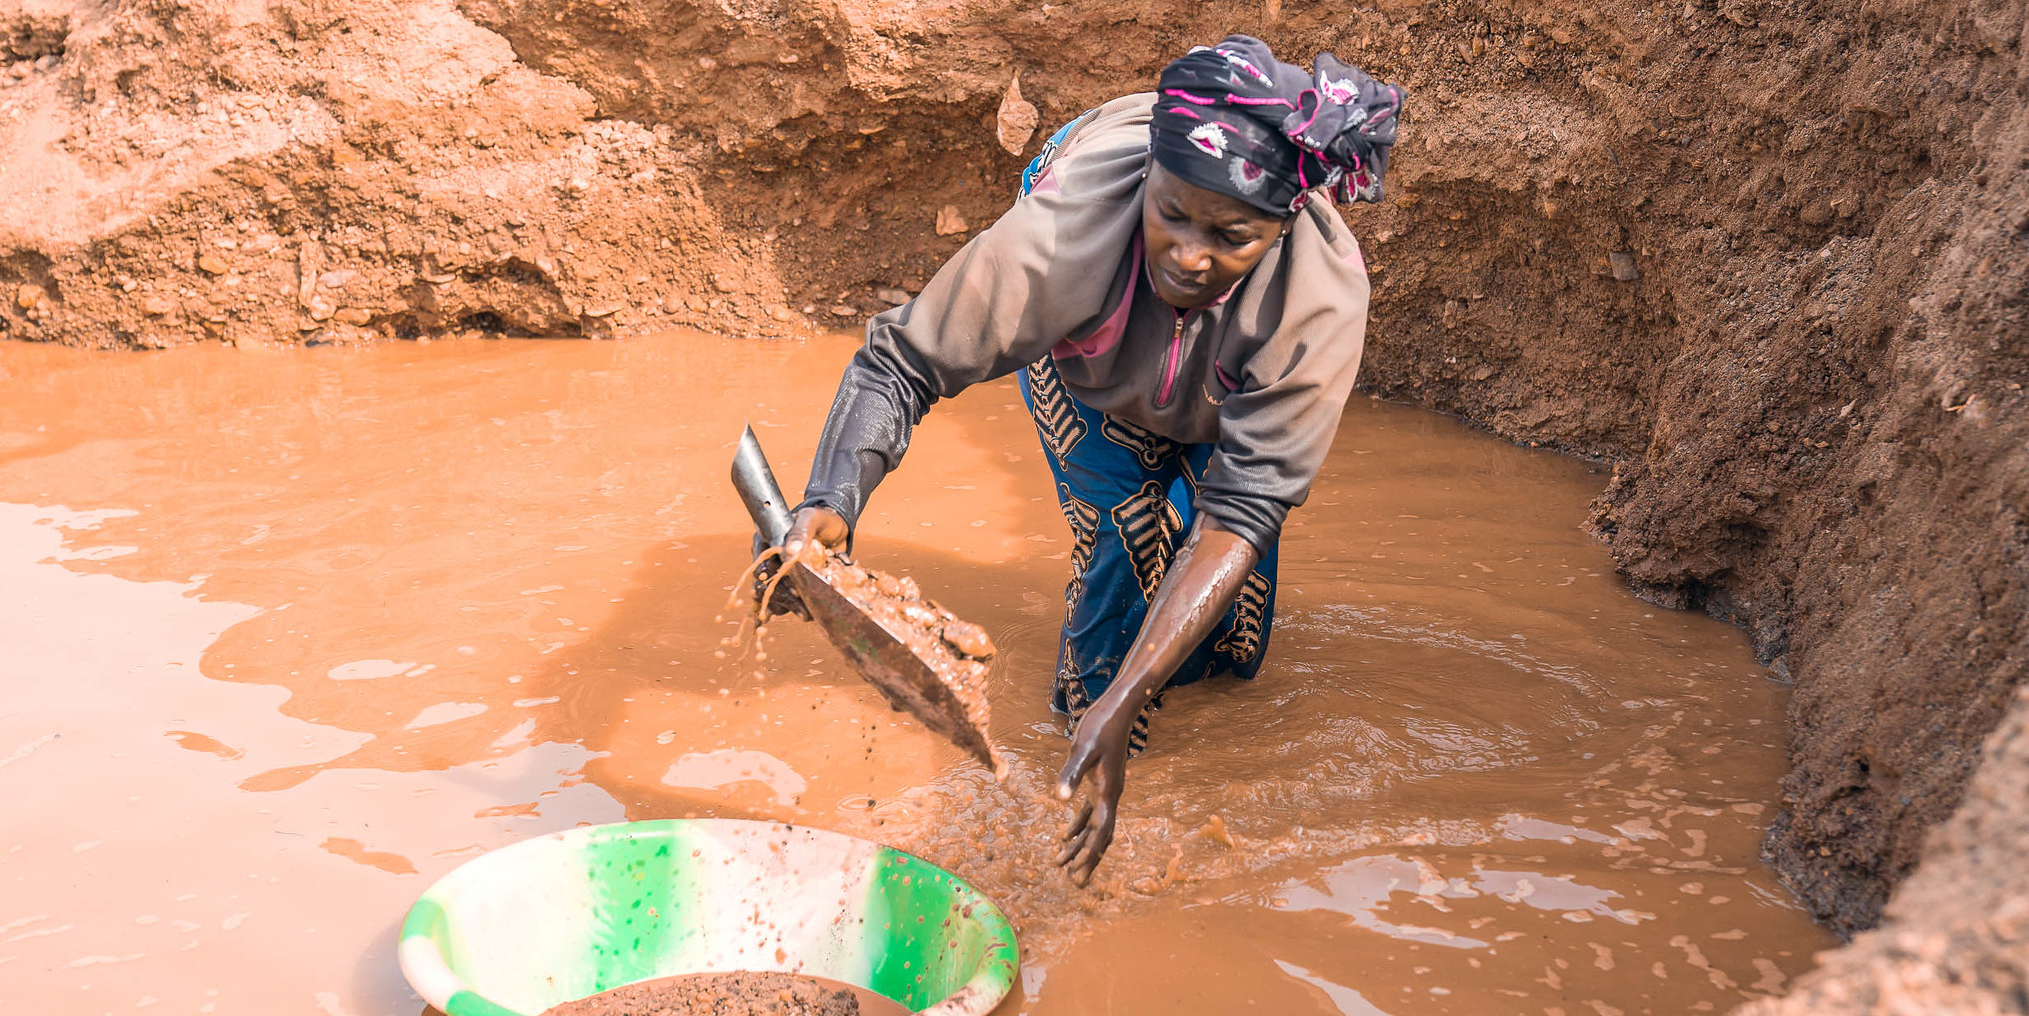 Women in Artisanal and Small-Scale Mining: Challenges and opportunities for  greater participation